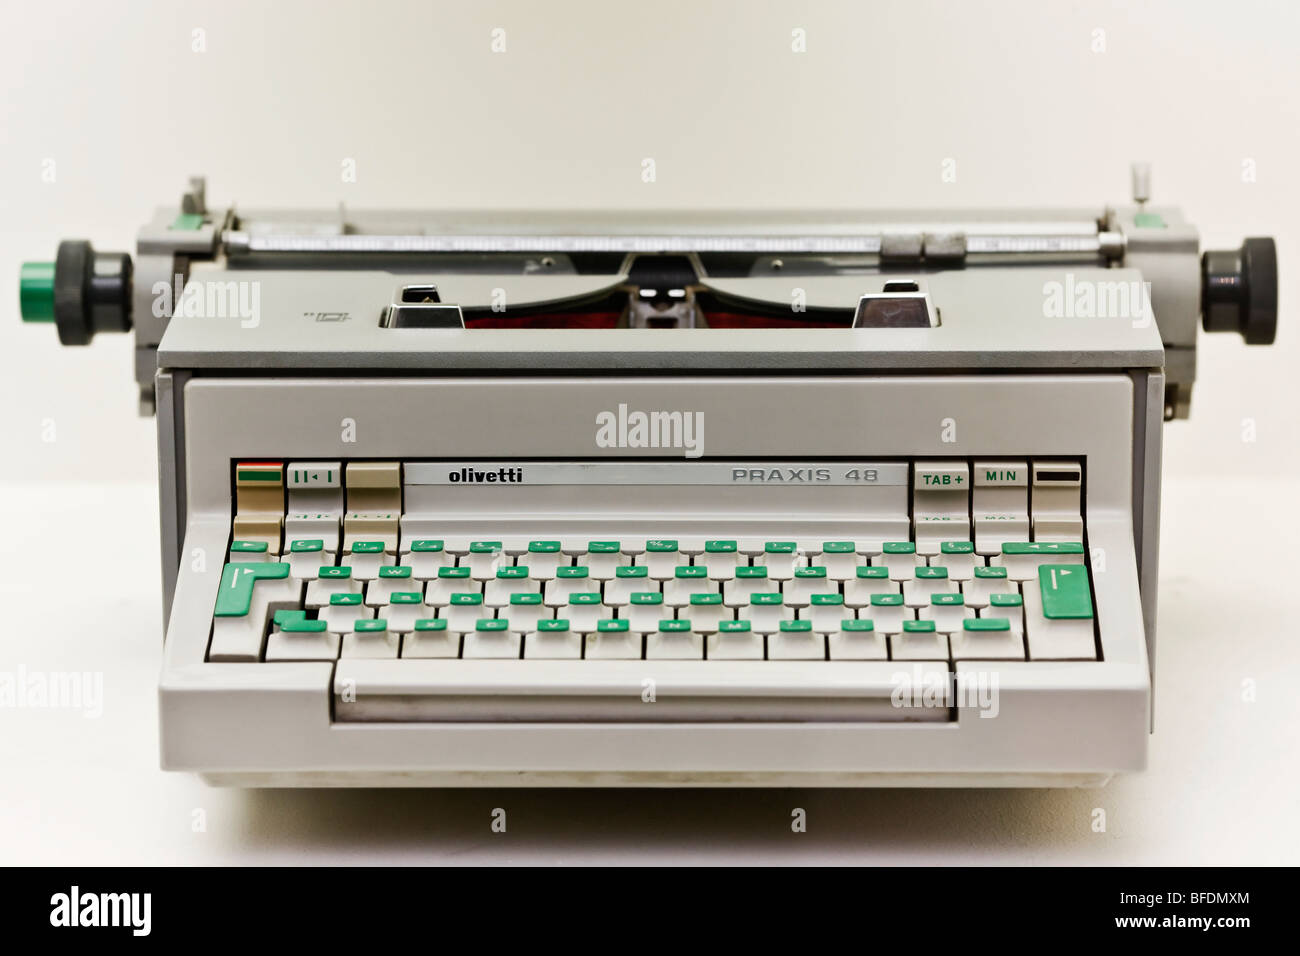 Olivetti electric typewriter from 1964 Stock Photo